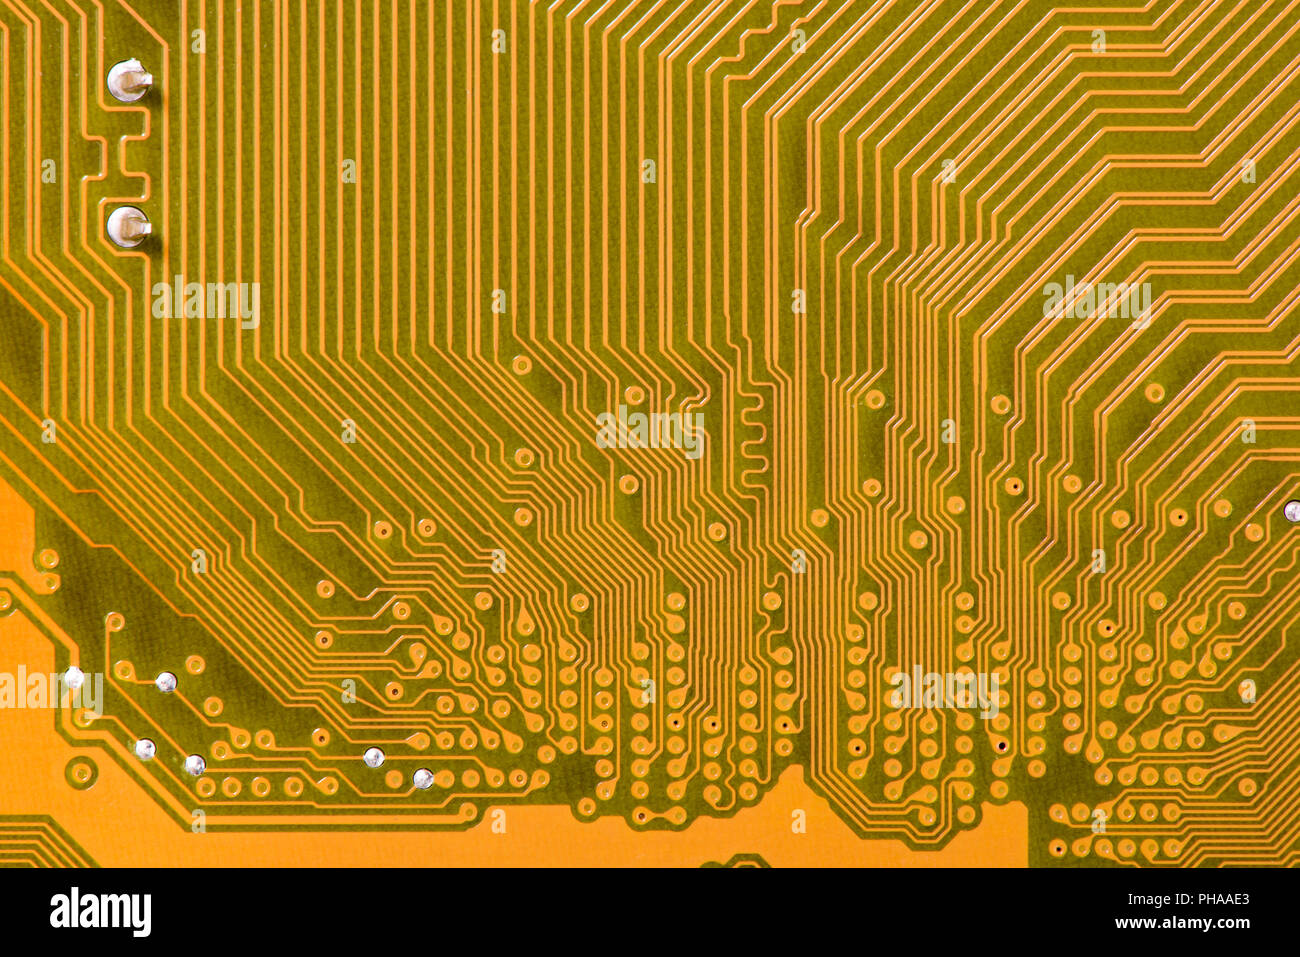 computer motherboard with chips and connecting strips in detail Stock Photo